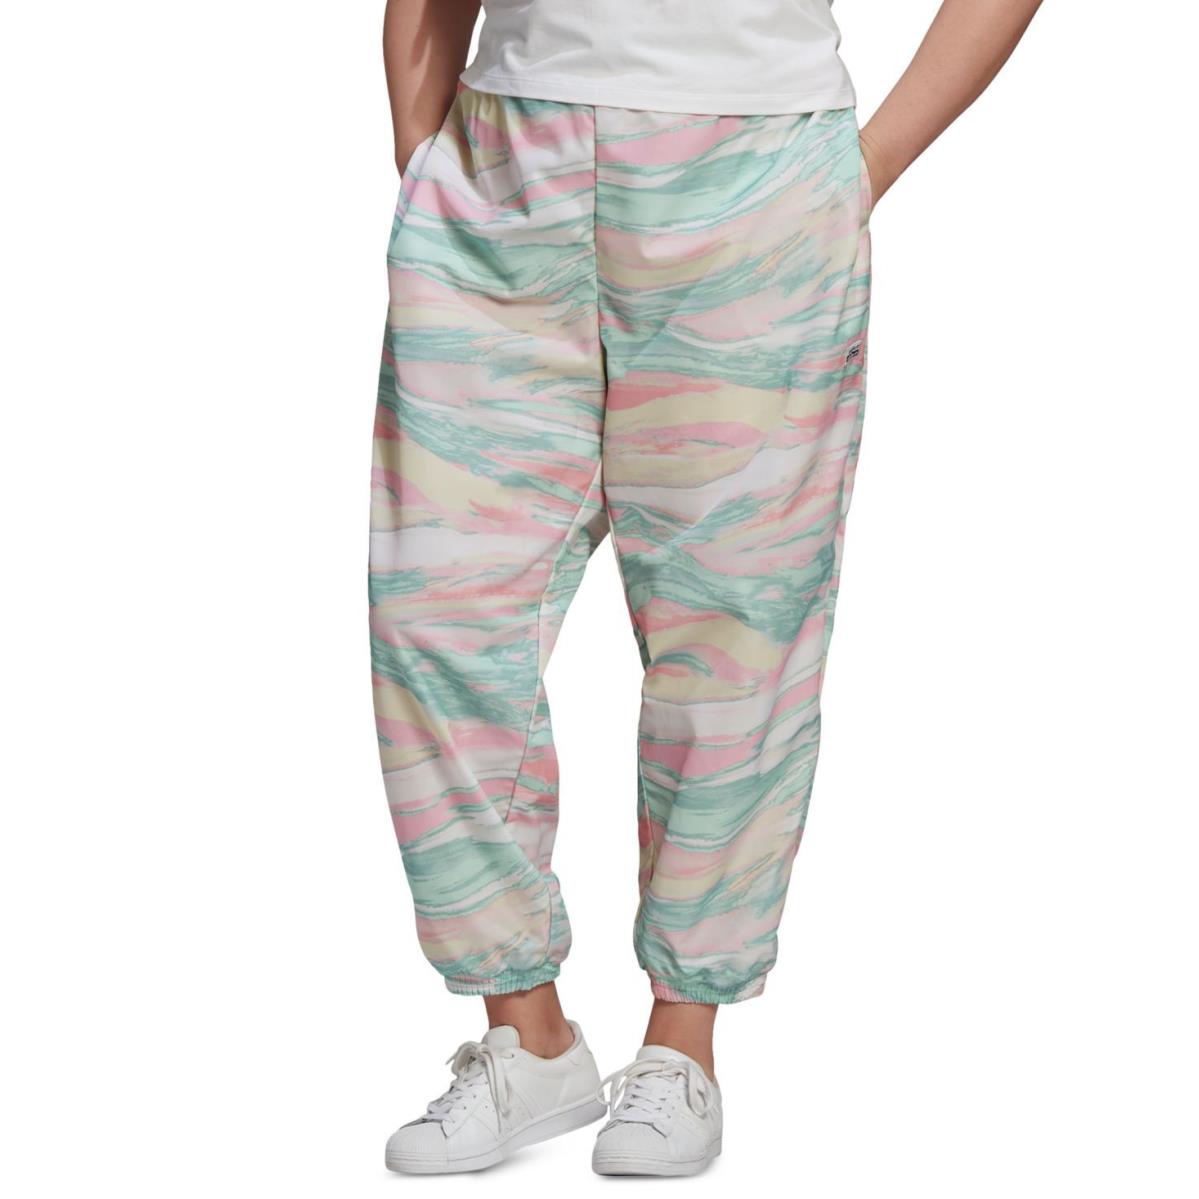 Adidas Womens Plus Size Printed Track Pants Color-multicolor Size-2X